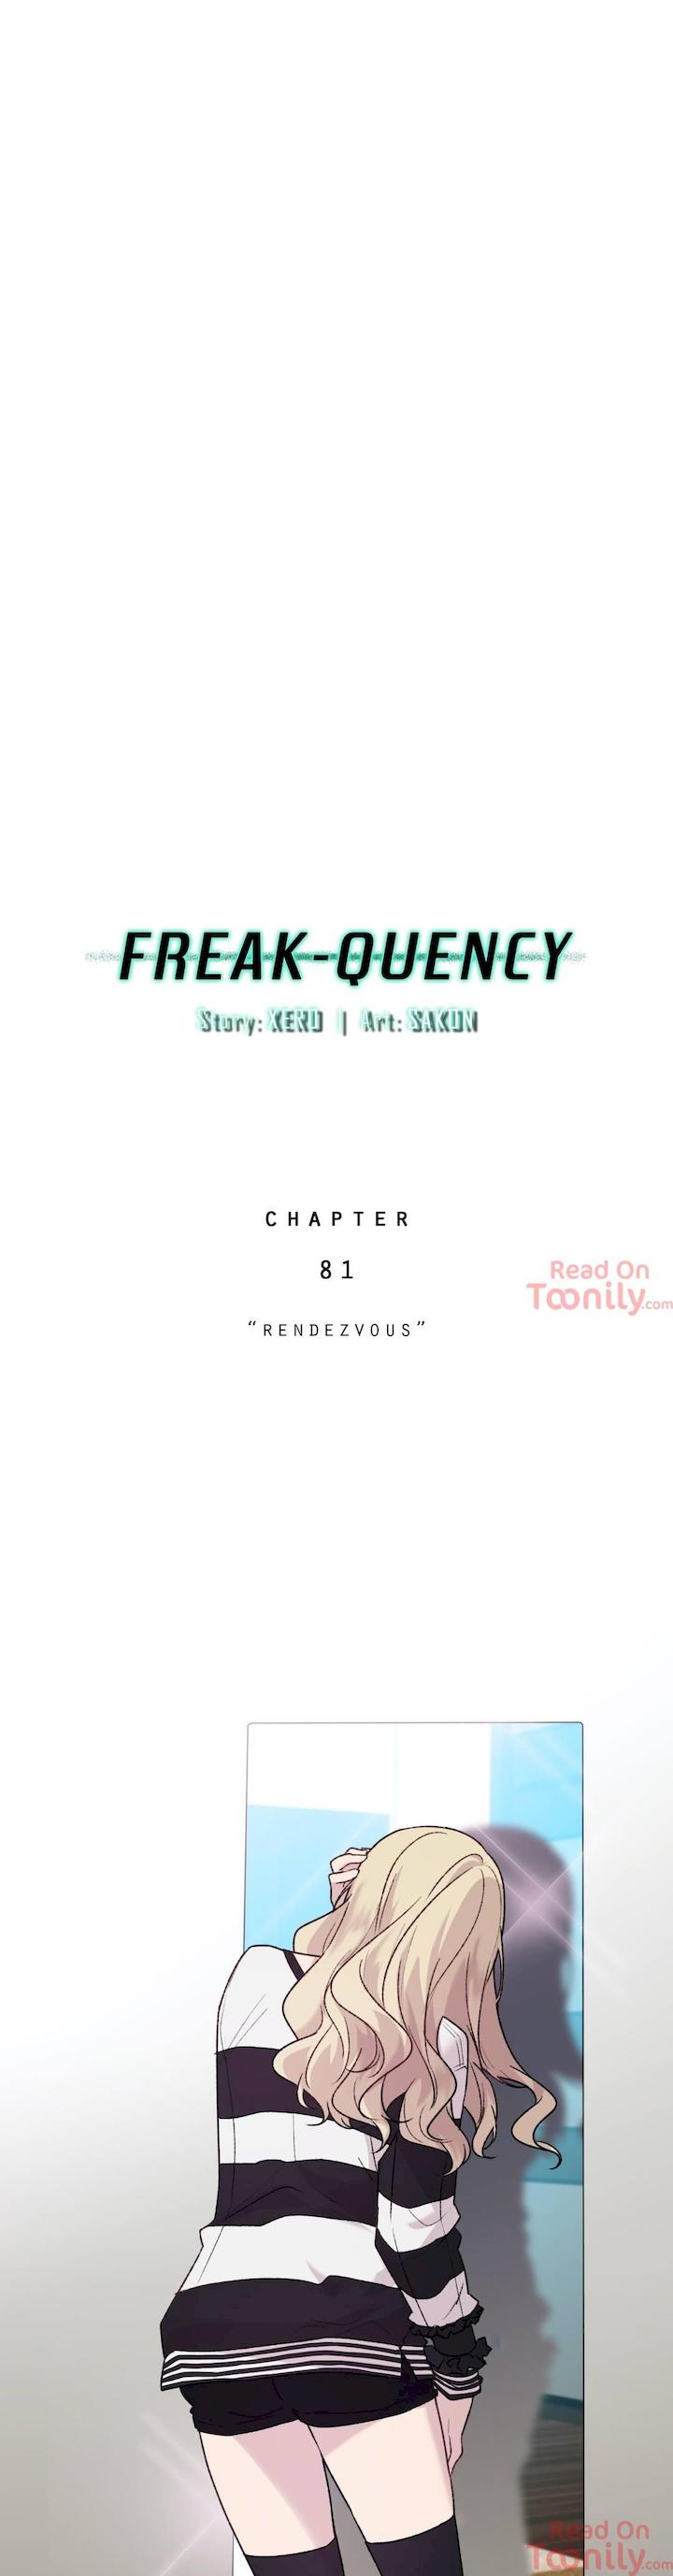 Freak-Quency - Chapter 81 Page 1